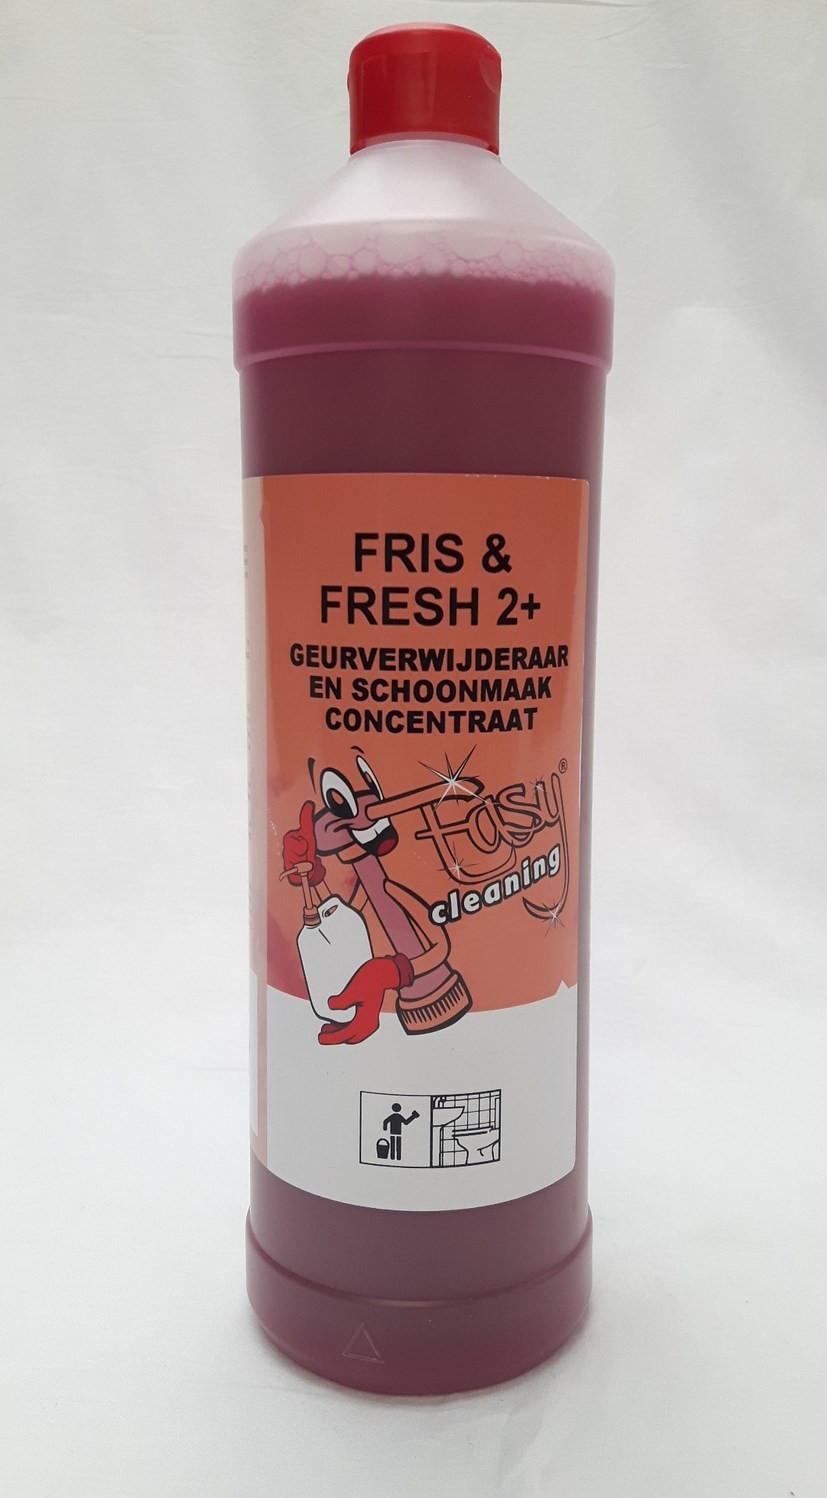 Easy Cleaning Nr. 2 Fris & fresh 1 liter concentraat